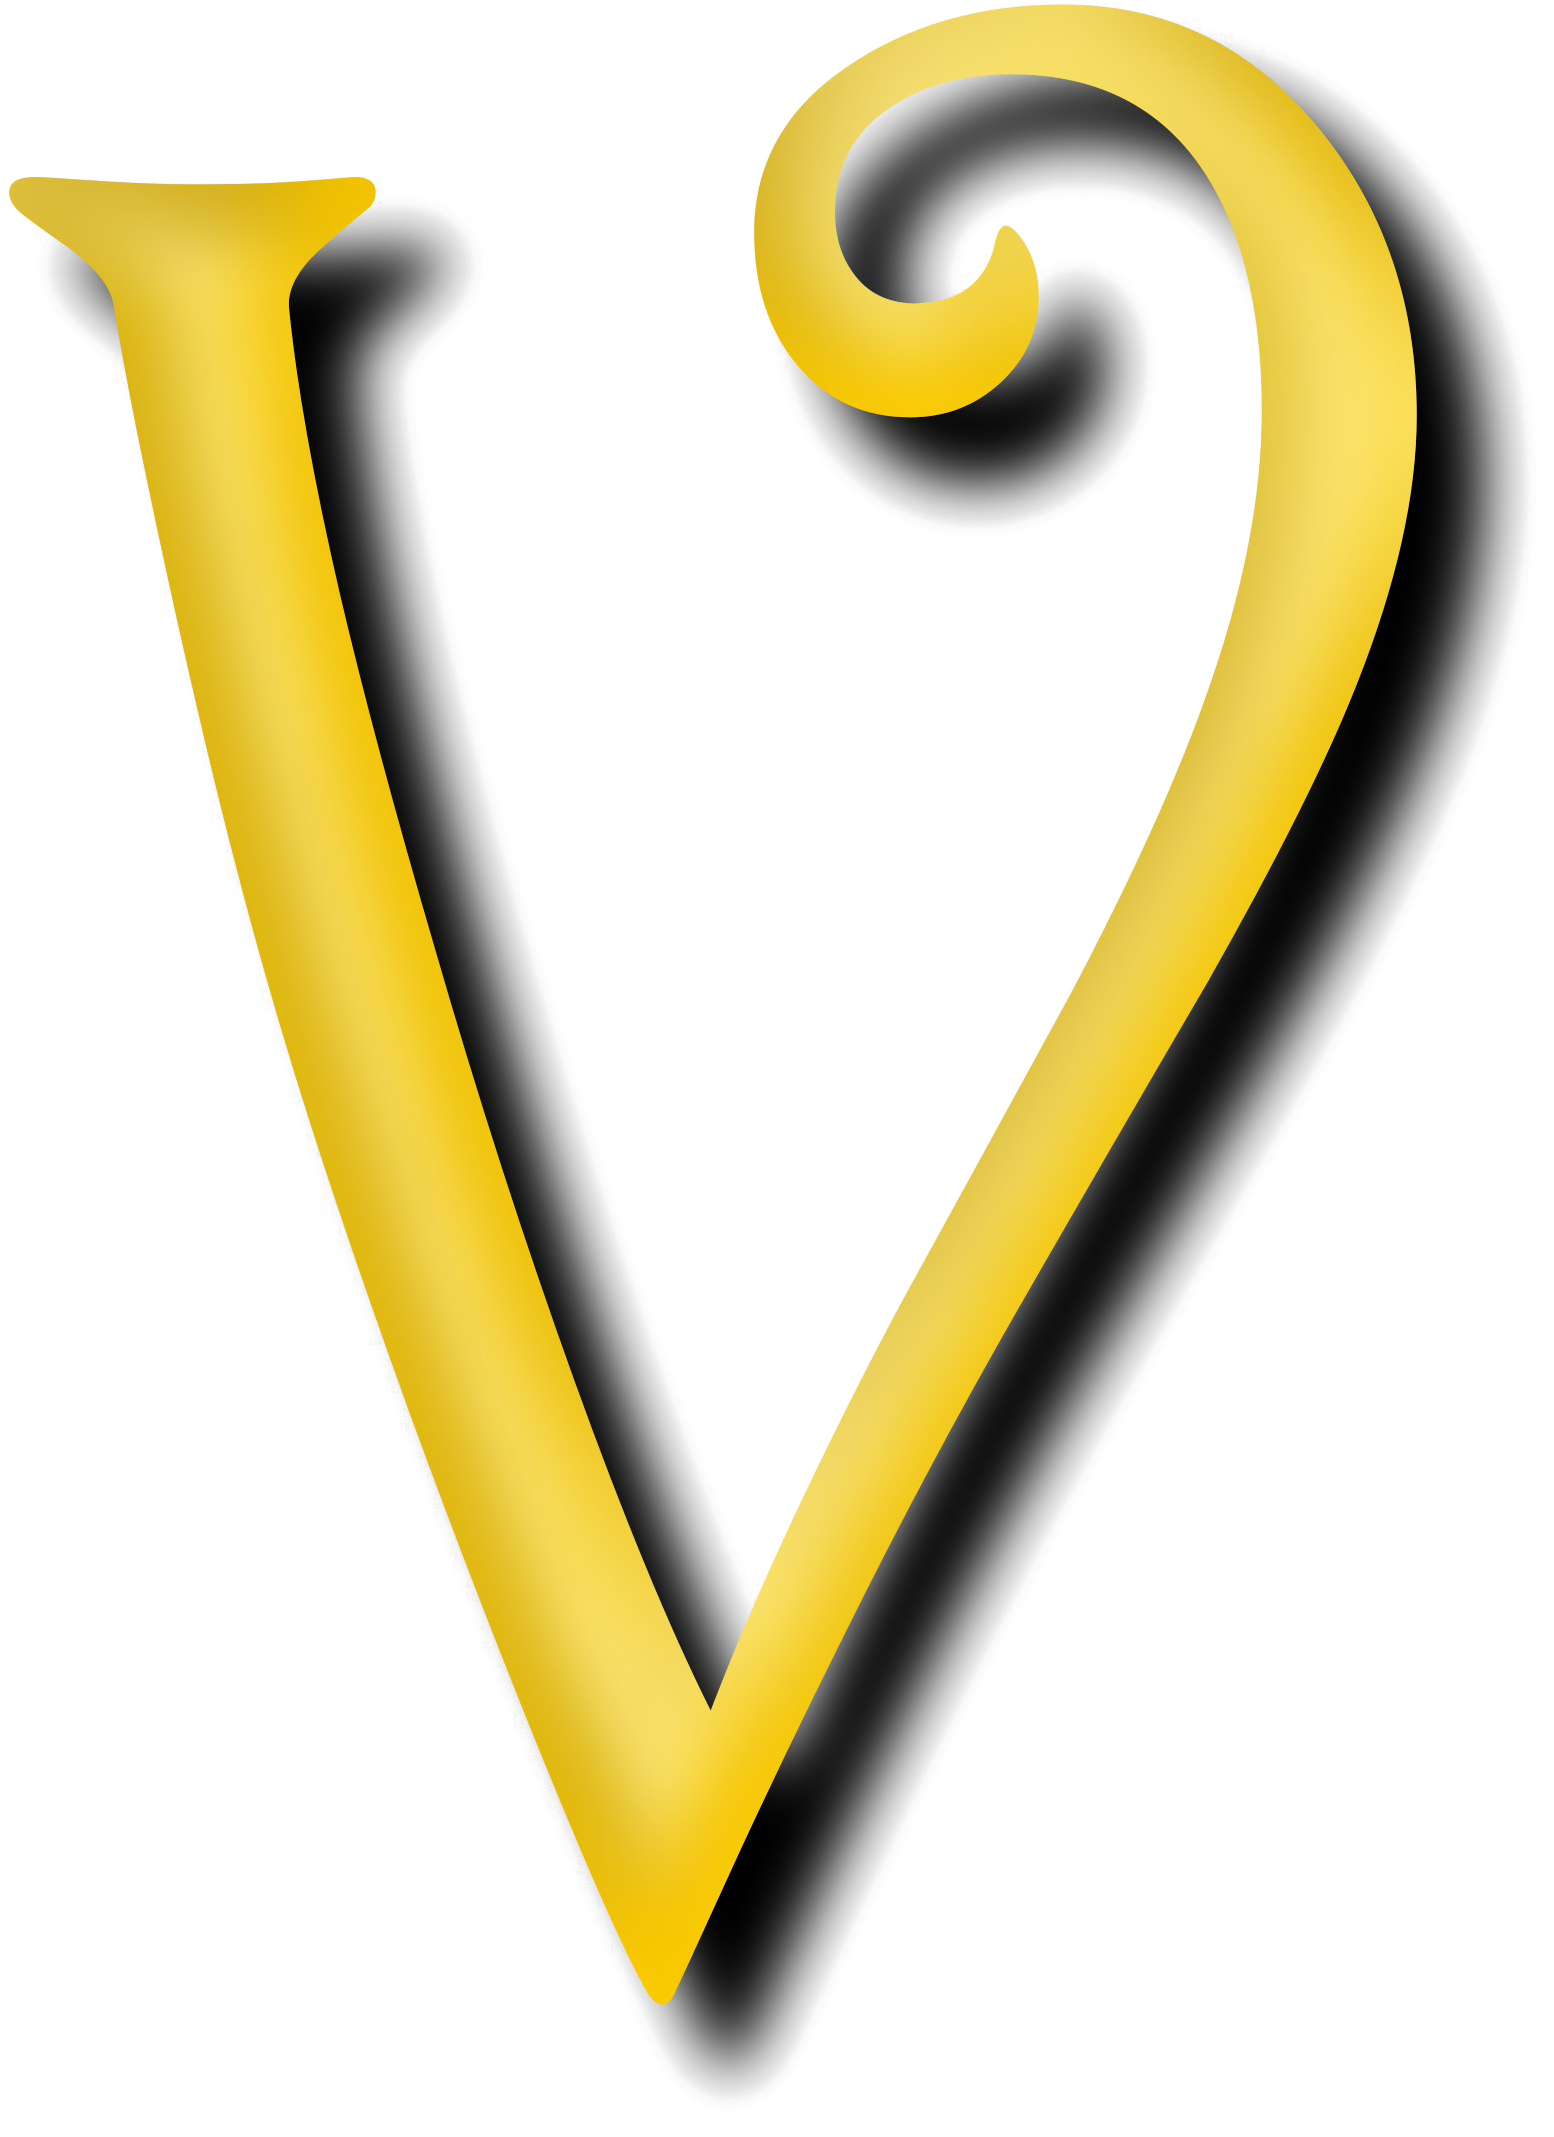 A Yellow And Black Letter V